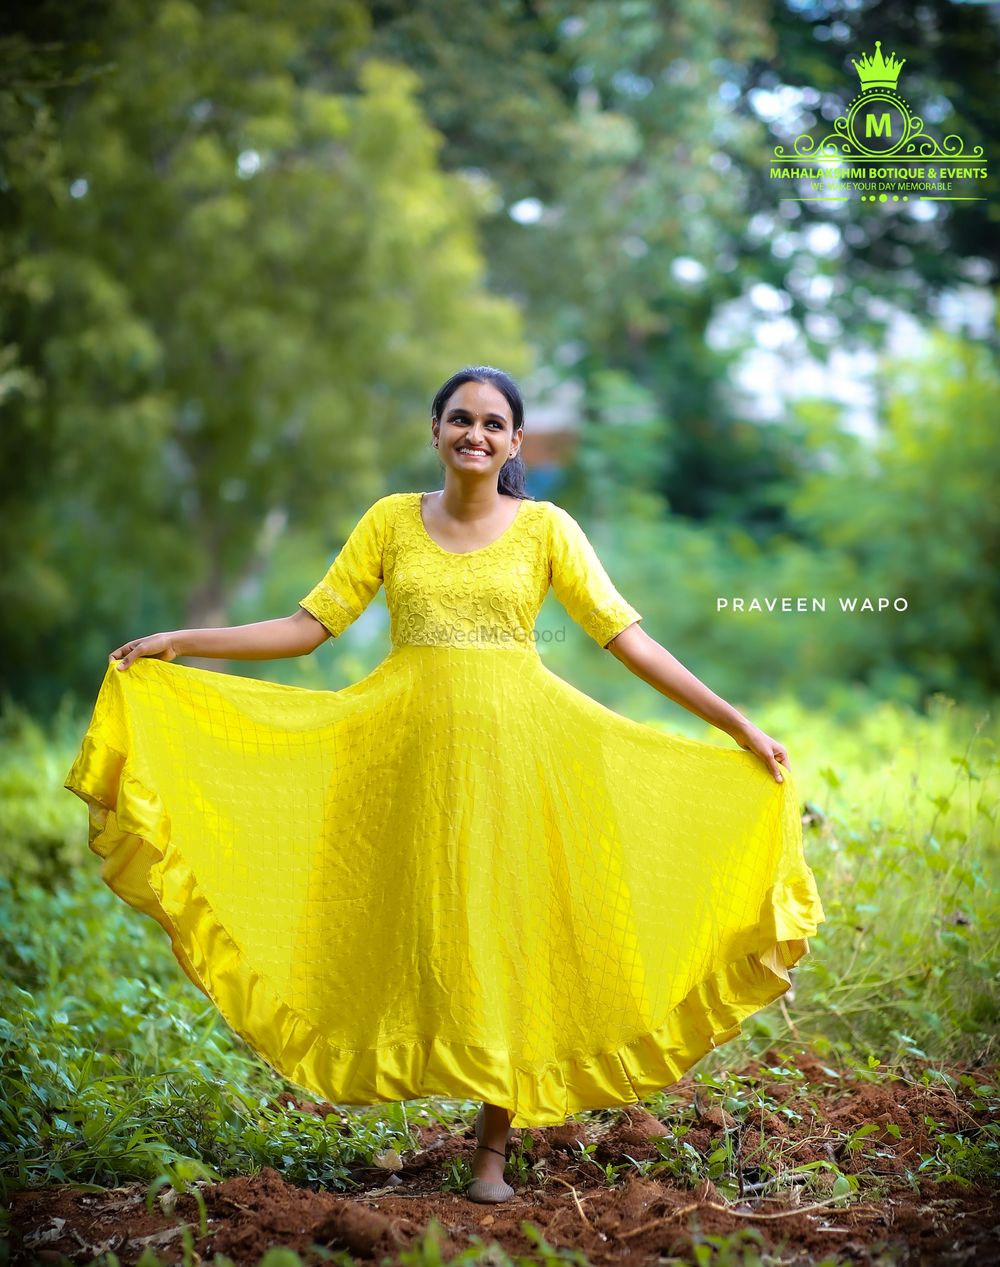 Photo From New styles - By Sri Mahalakshmi Boutique and Events